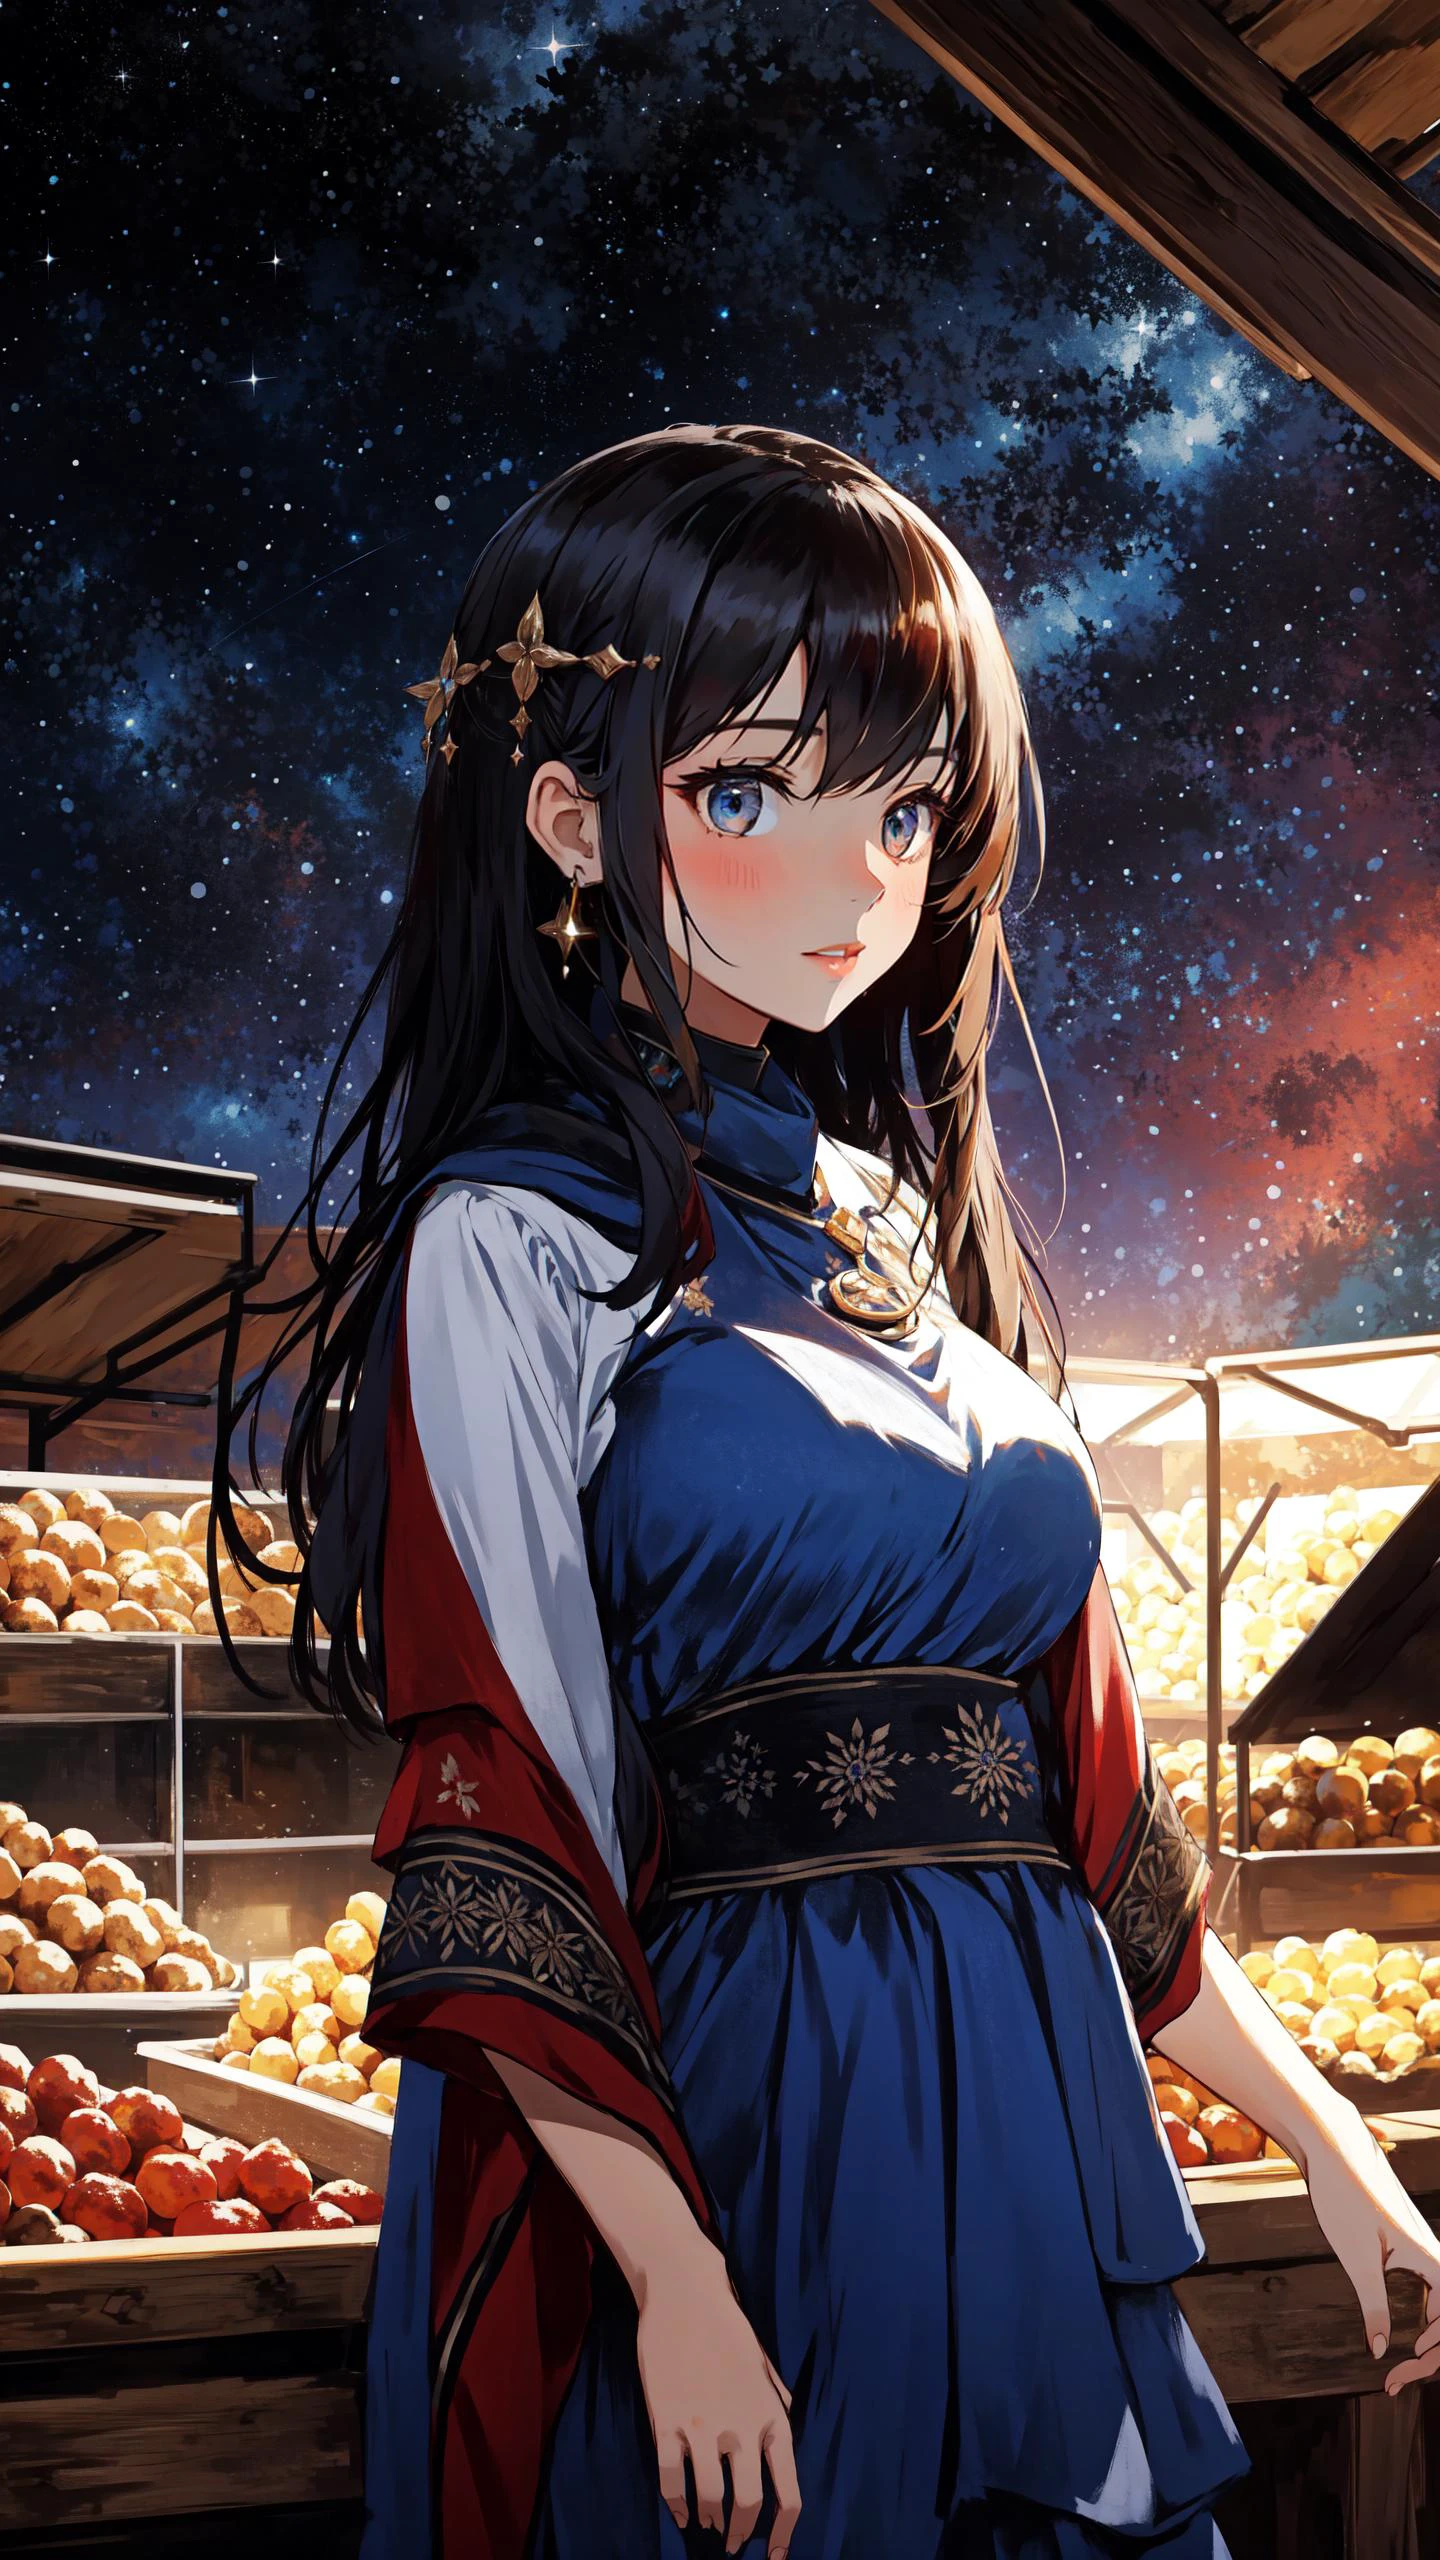 (Layered Depth, Parallax Effect, Soft focus foreground:1.3) (1girl, perfect seductive young woman Interstellar Market Scene:1.3), iridescent storm clouds, bustling interstellar market set on a distant planet, a tapestry of alien cultures, exotic foods, and colorful bazaars